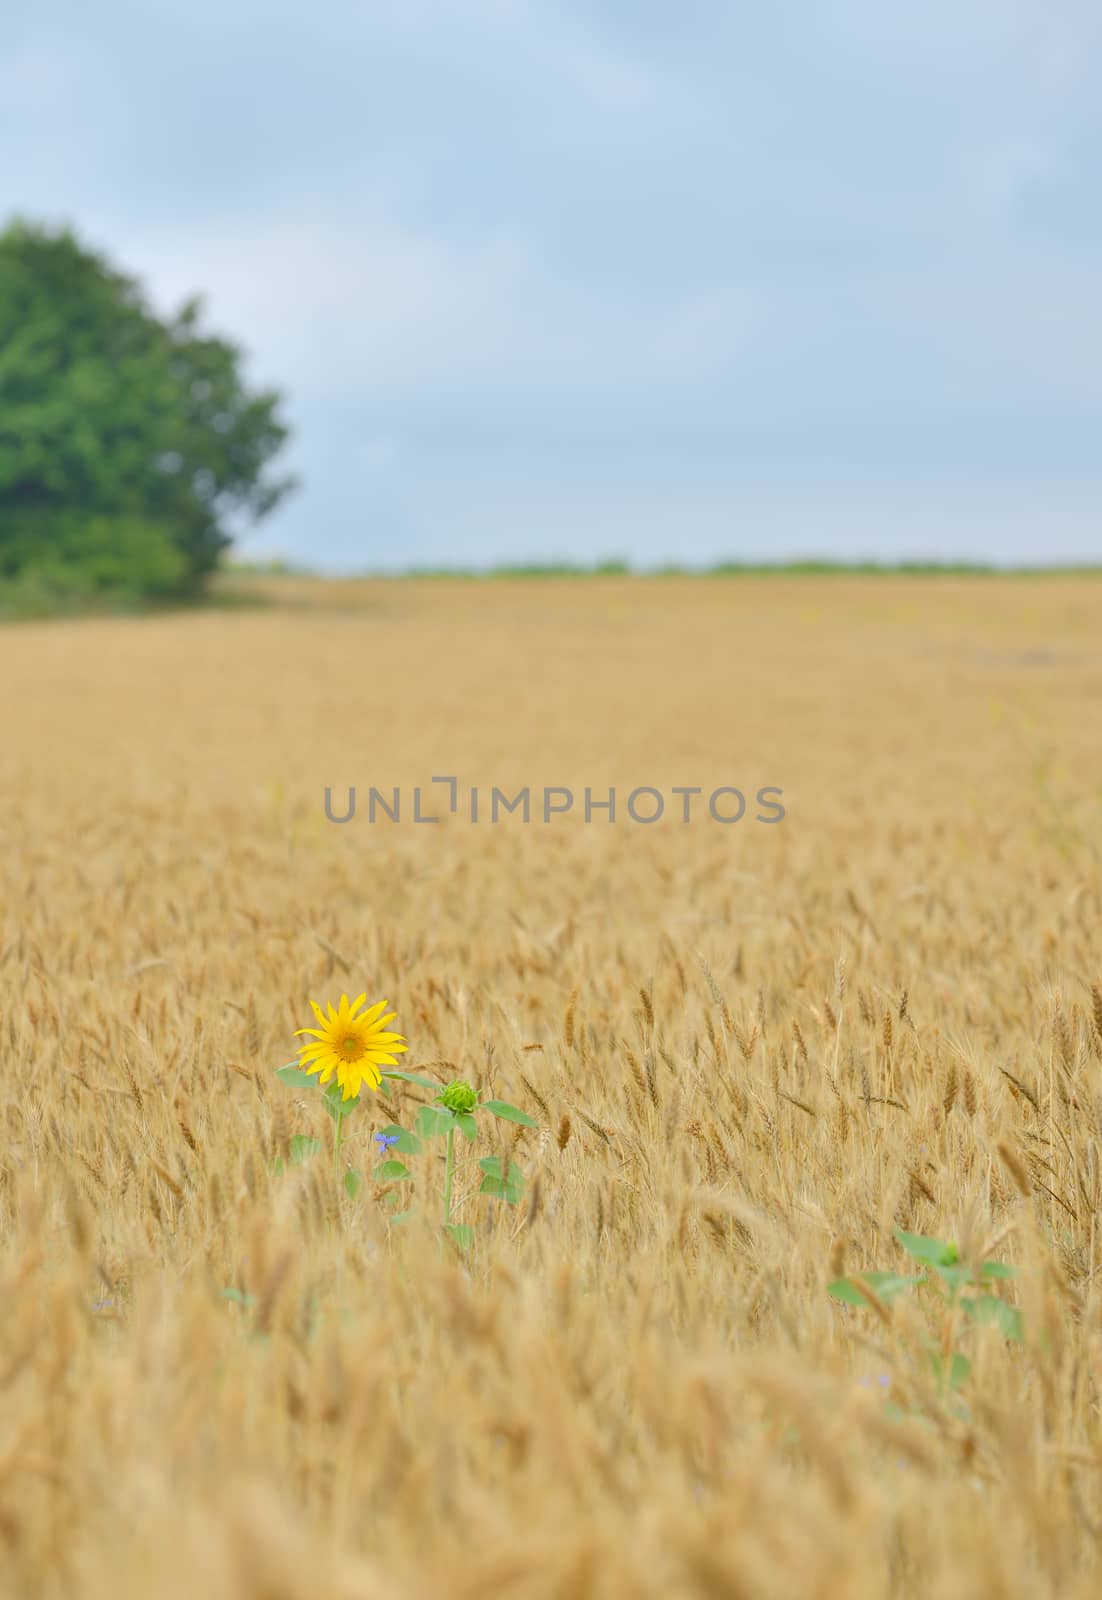 Isolated Sunflower in wheat field by mady70